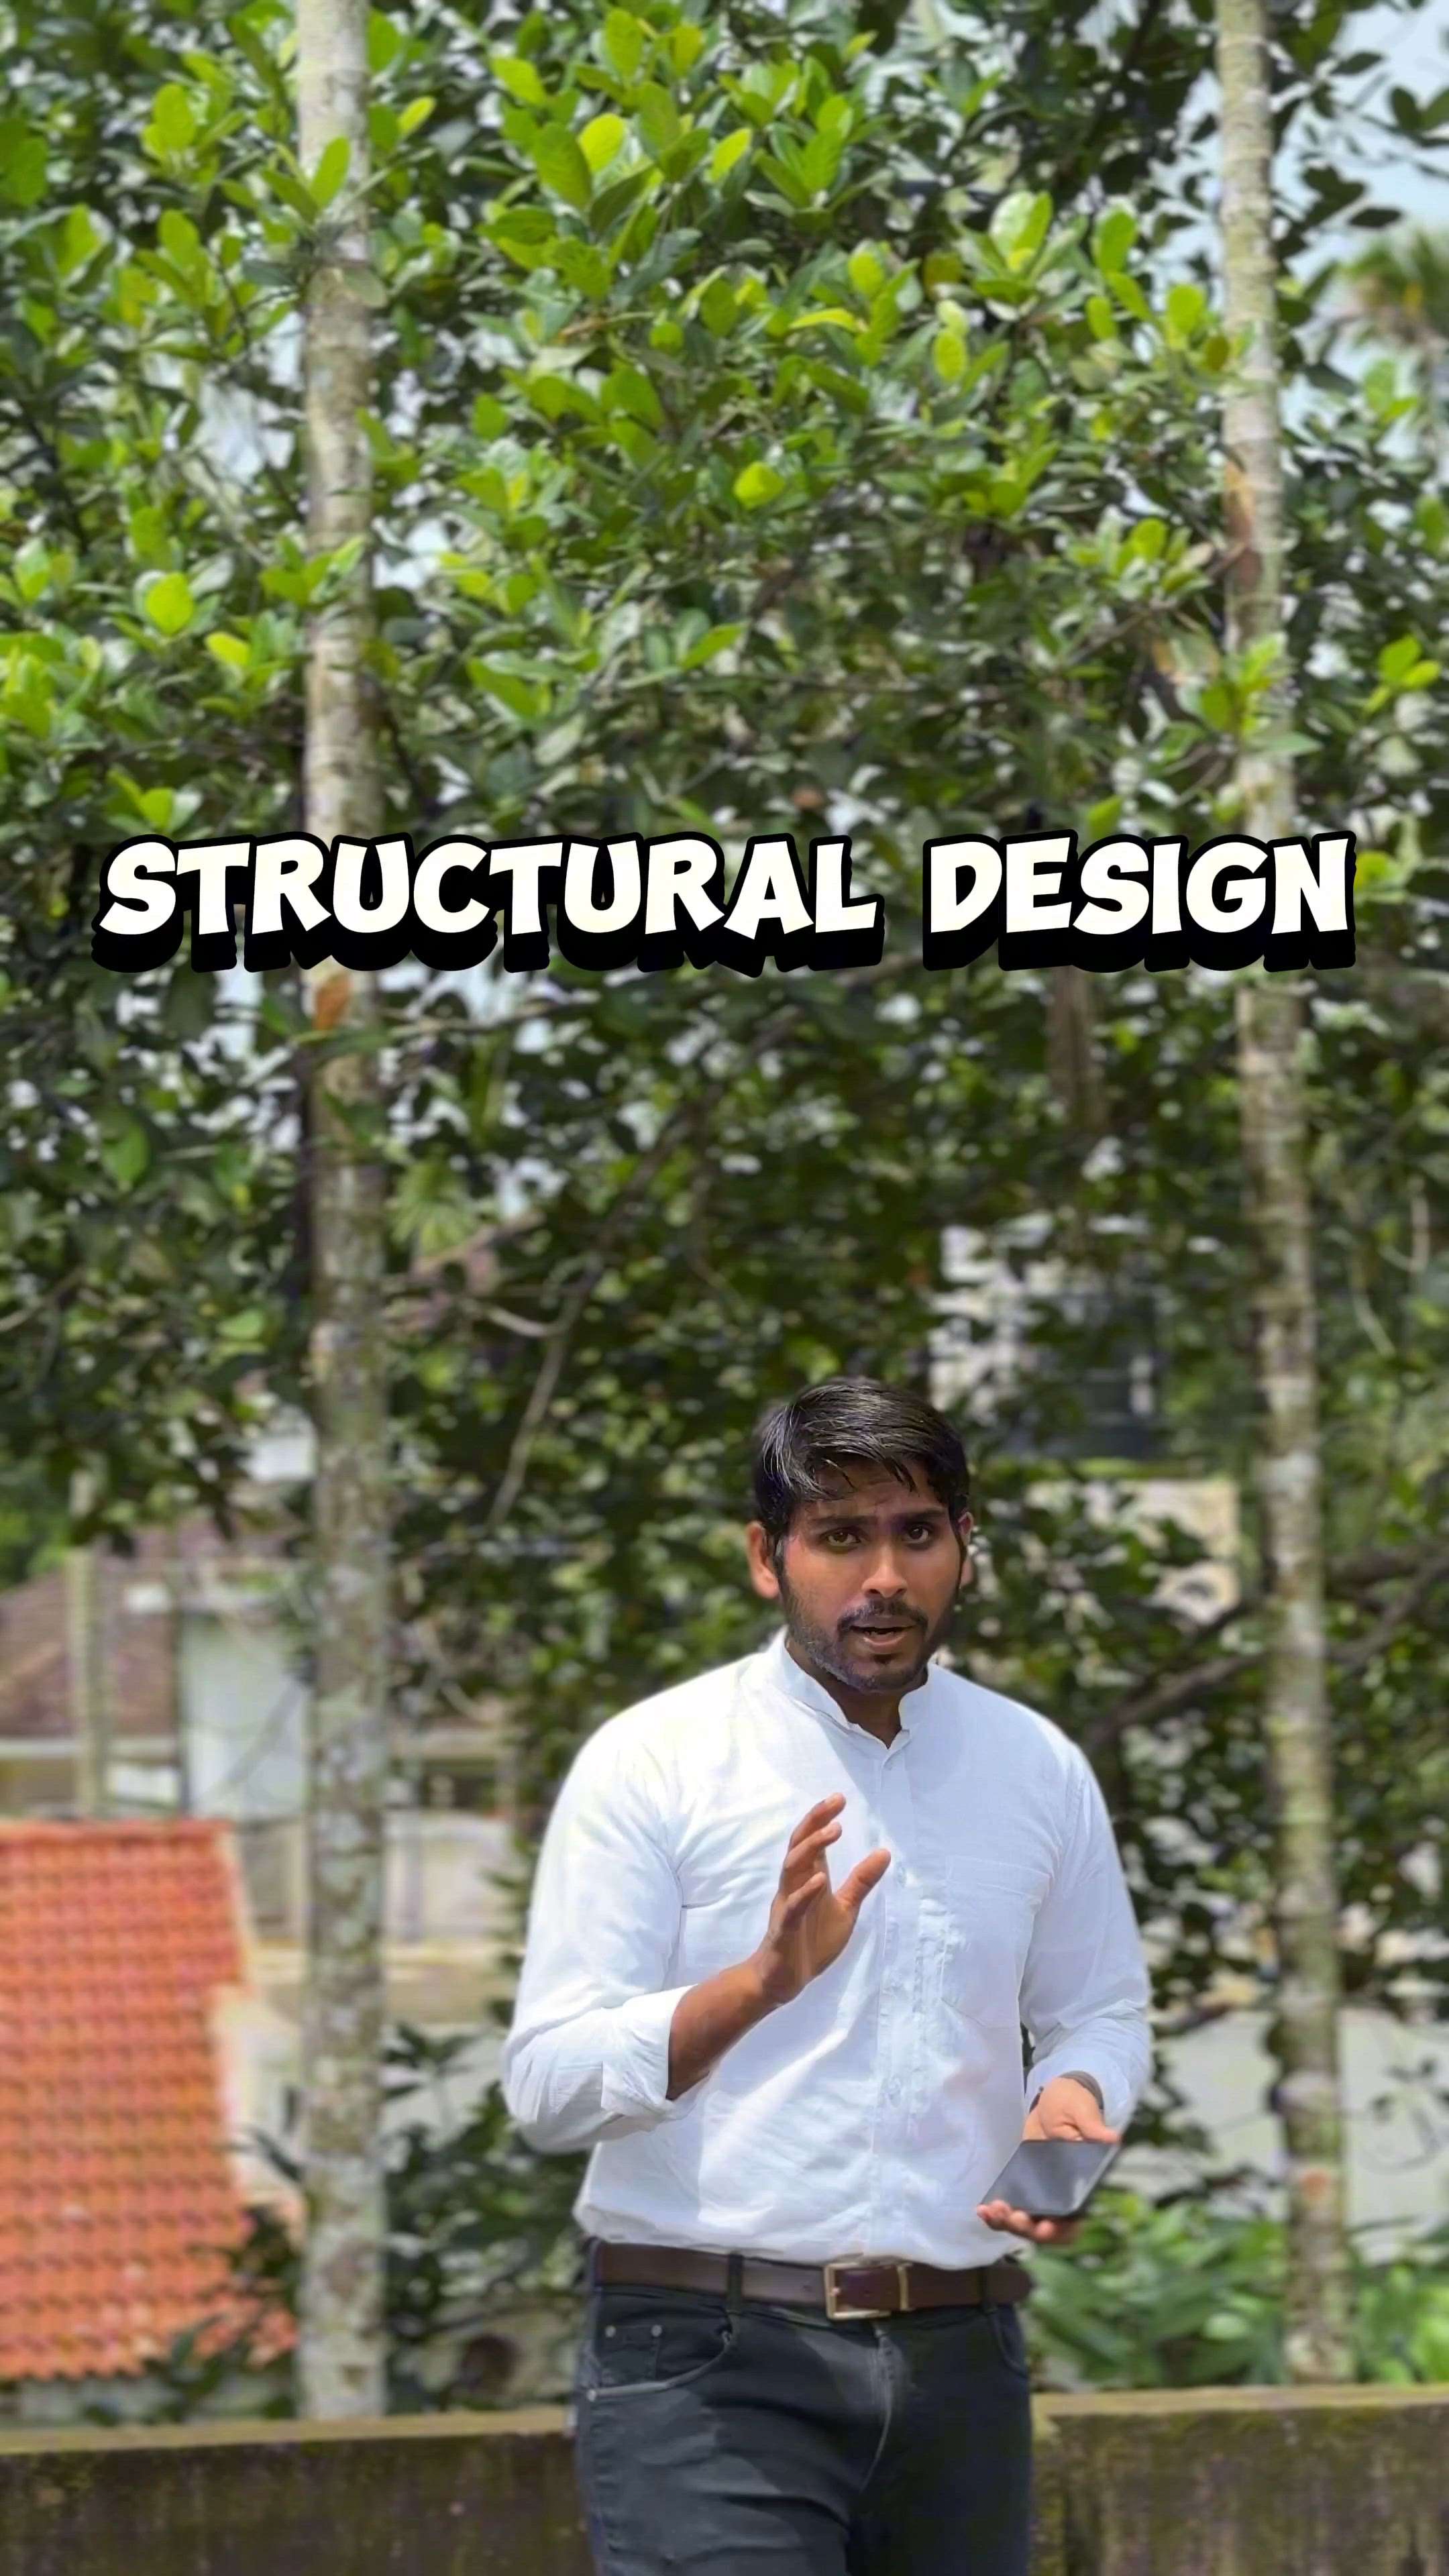 Importance of structural drawings. have a look.

#keralahomes #kerala #architecture #keralahomedesign #interiordesign #homedecor #home #homesweethome #interior #keralaarchitecture #interiordesigner #homedesign #keralahomeplanners #homedesignideas #homedecoration #keralainteriordesign #homes #architect #archdaily #ddesign #homestyling #traditional #keralahome #freekeralahomeplans #homeplans #keralahouse #exteriordesign #architecturedesign #ddrawing #ddesigner #Structural_Drawing